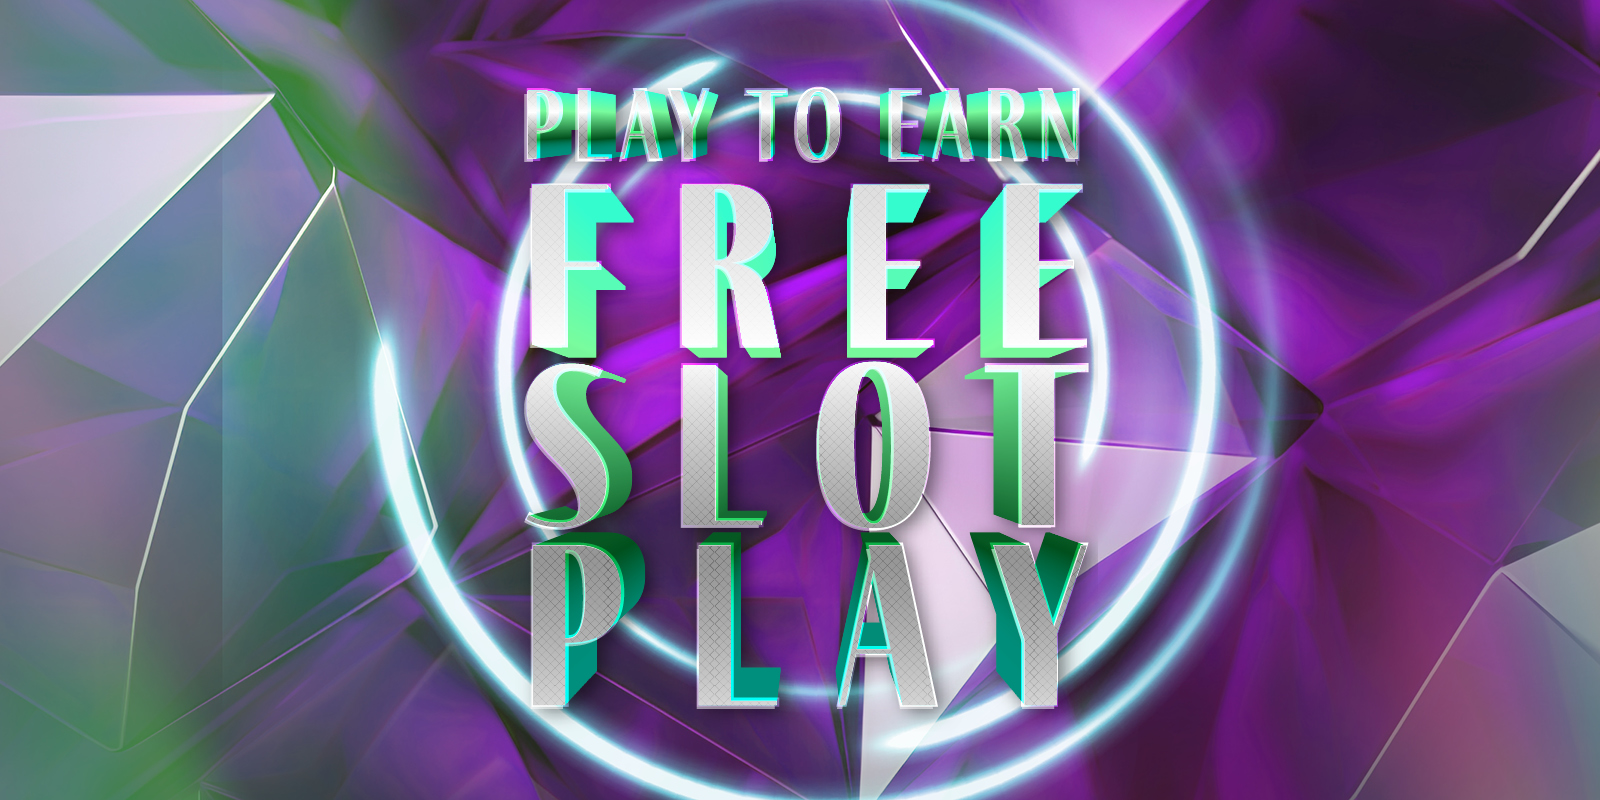 Play to Earn Free Slot Play creative with a purple and green geometric theme